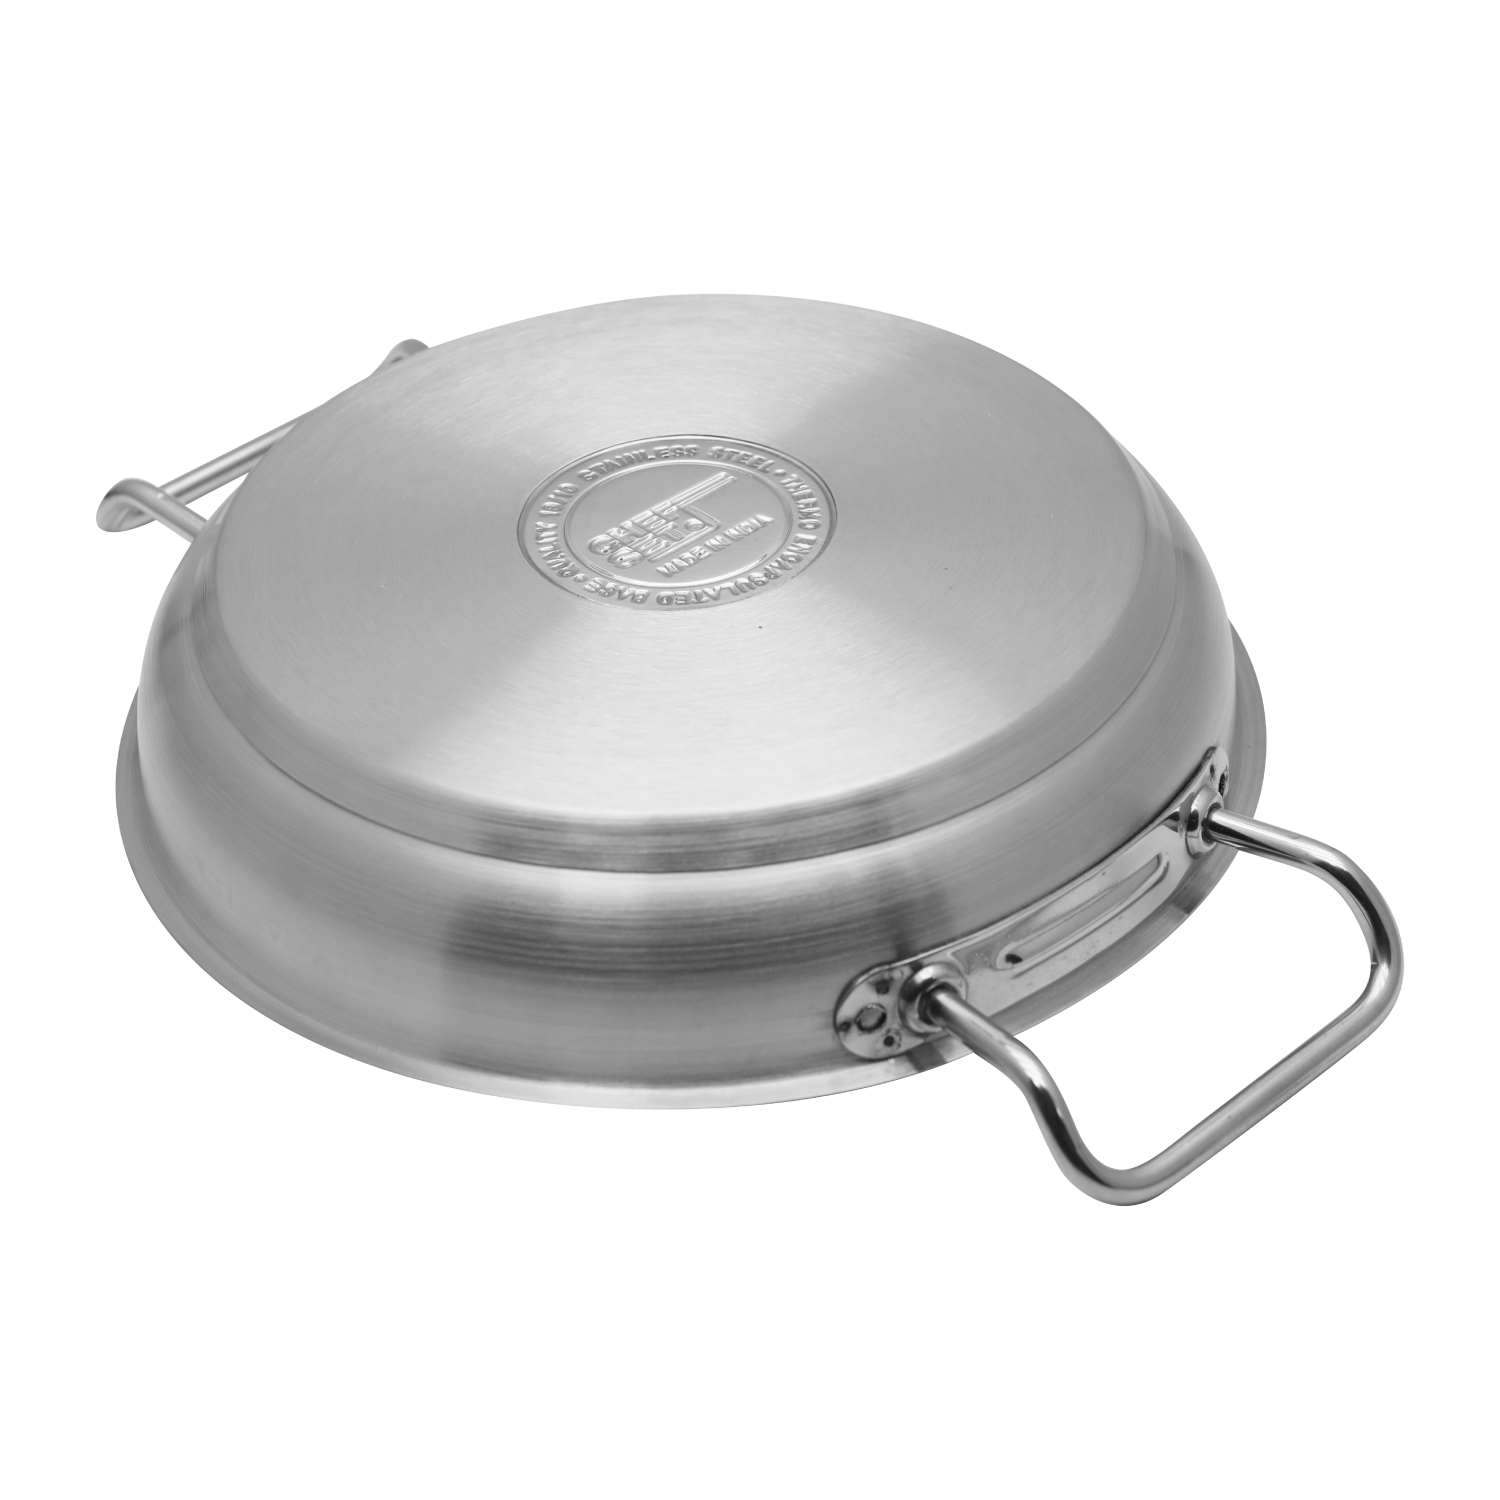 Chefset Steel Fry Pan With Side Handle 24Cm